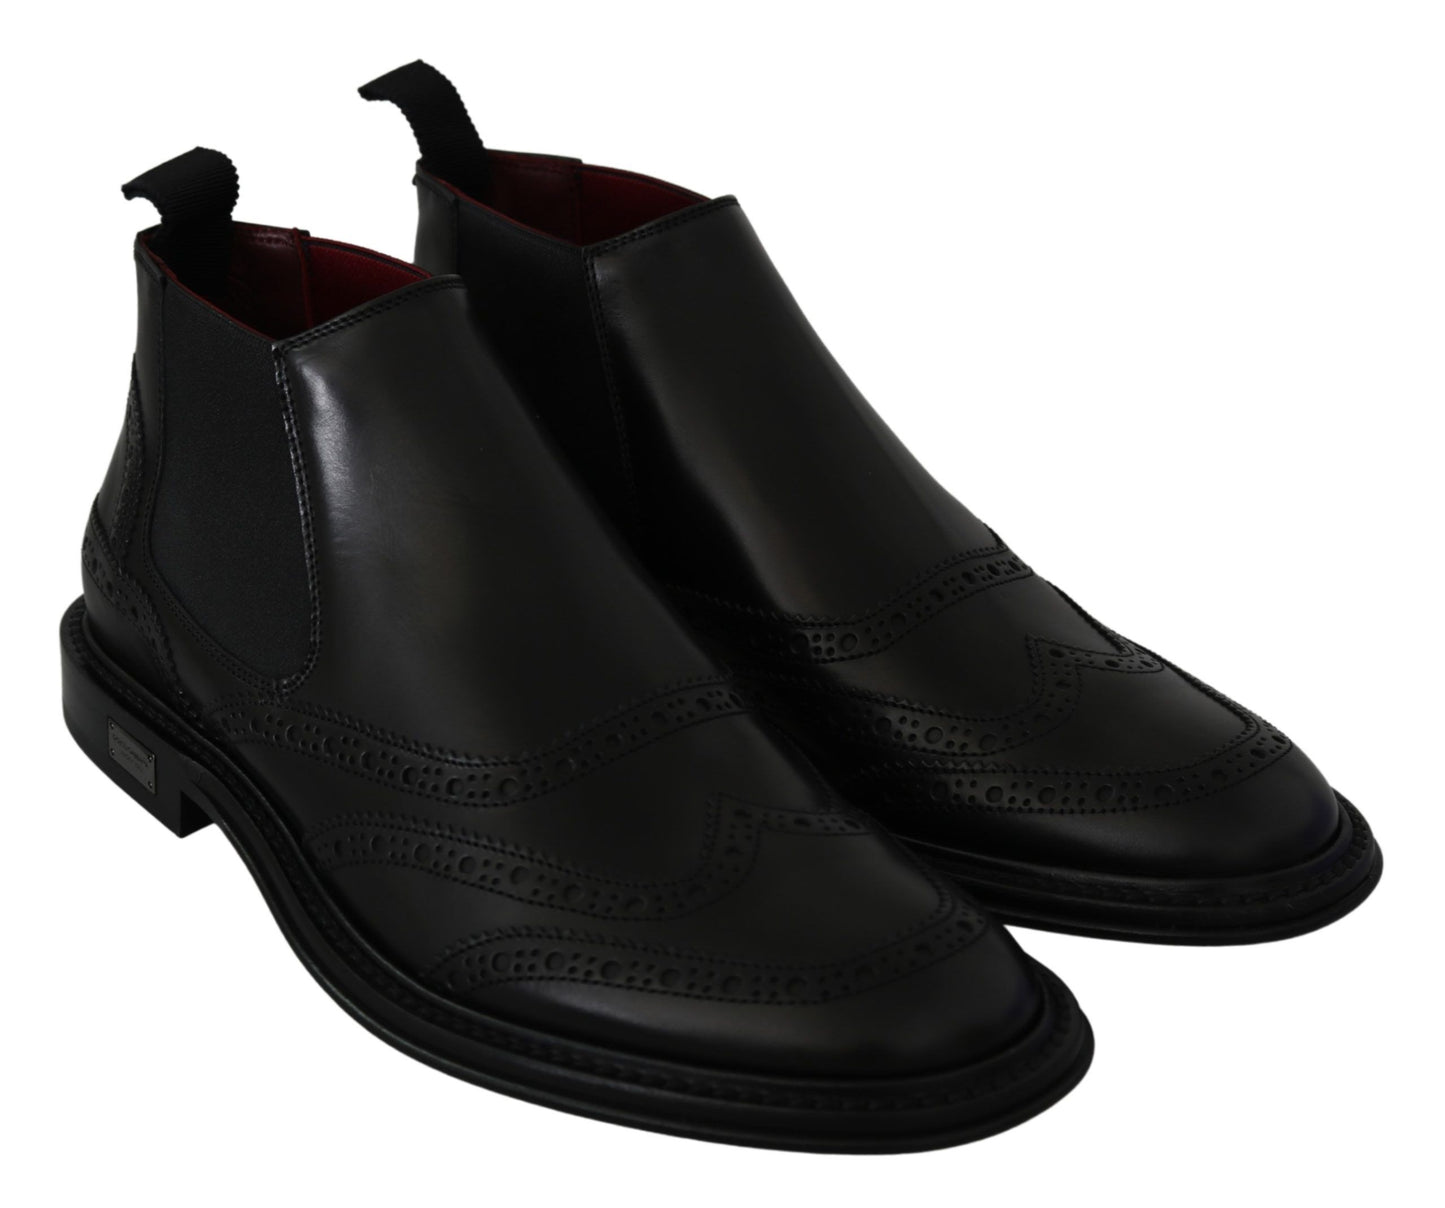 Black Leather Boots Stretch Mens Shoes